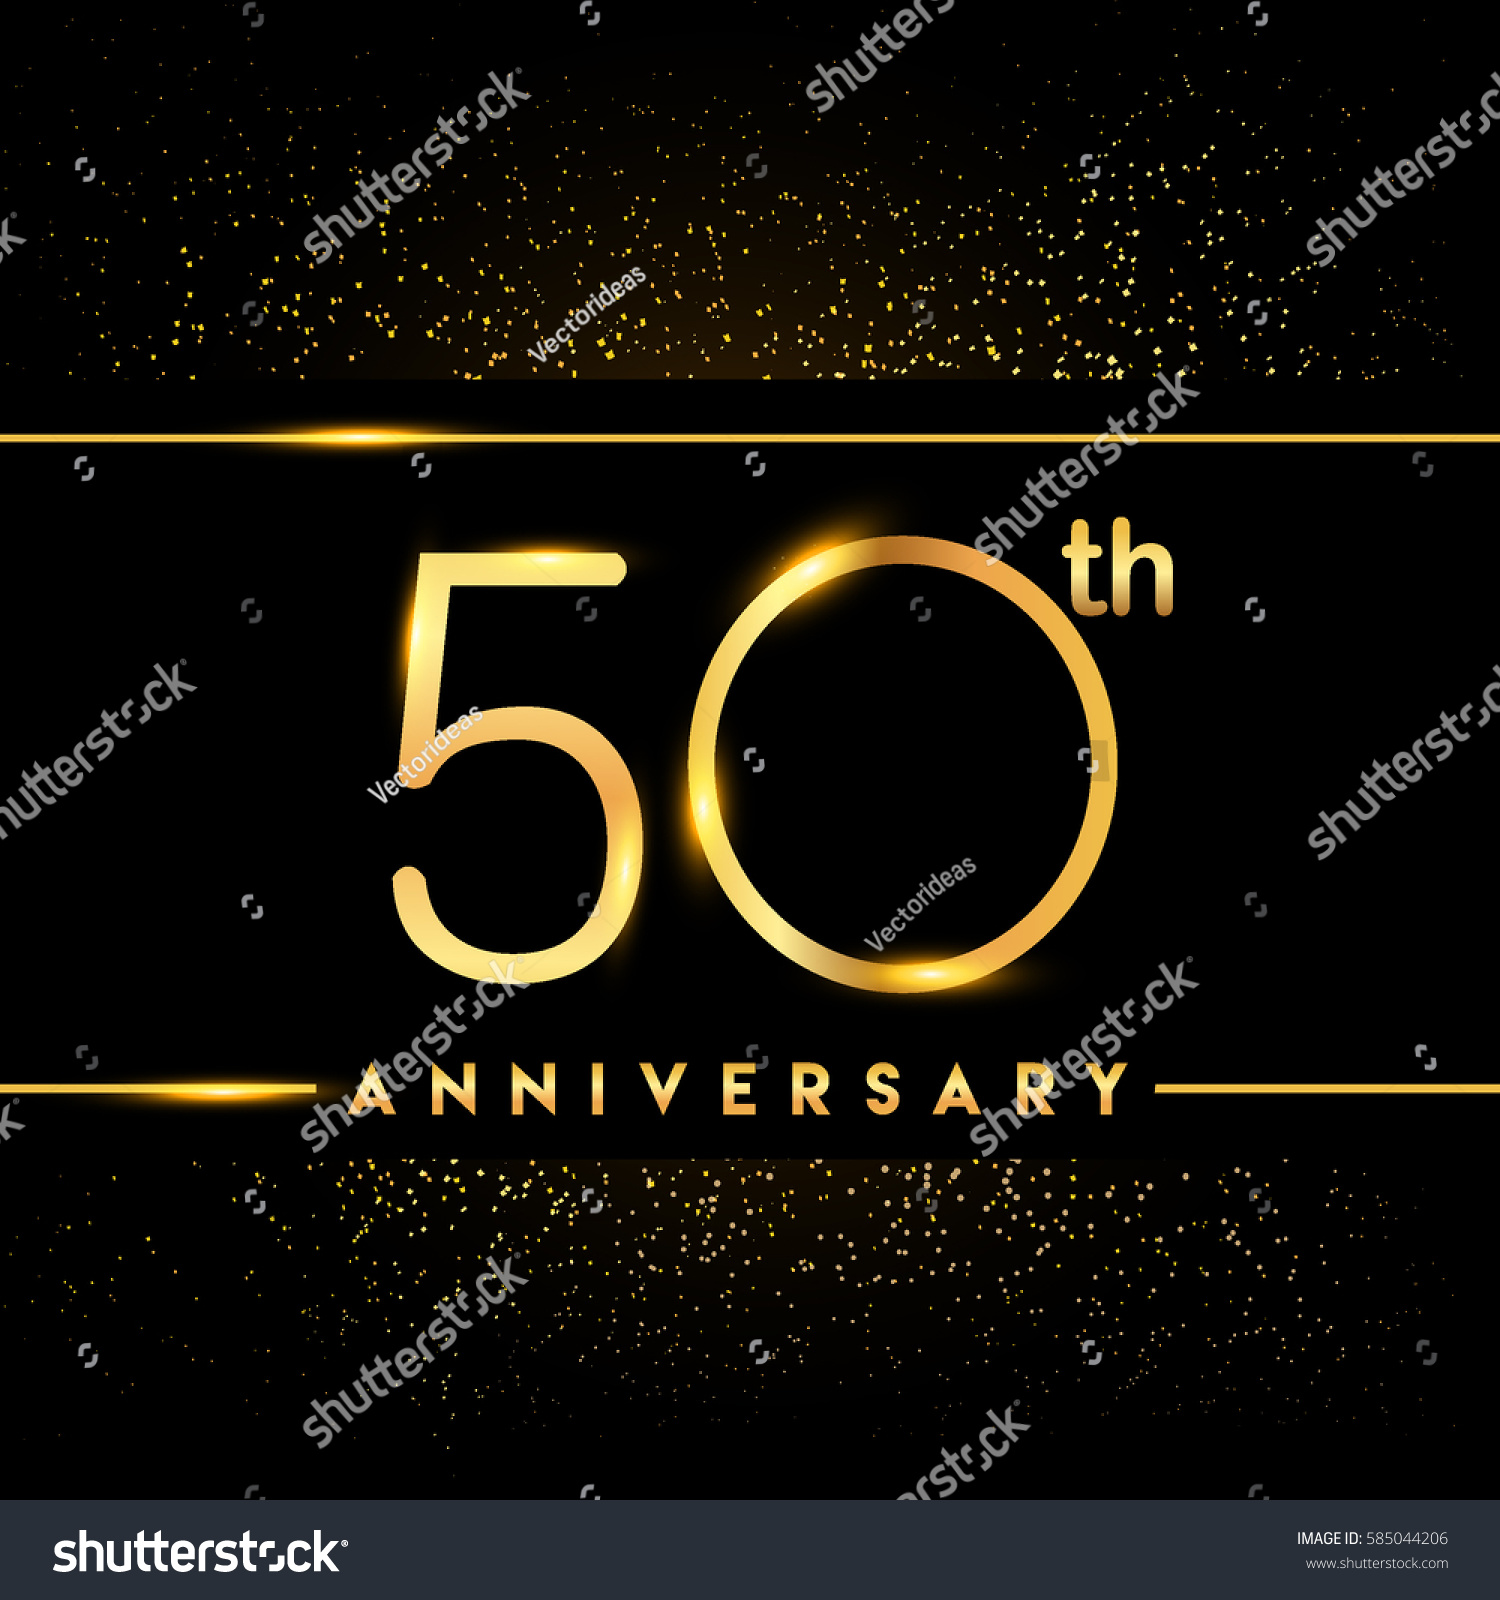 SVG of fifty years anniversary celebration logotype. 50th anniversary logo with confetti golden colored isolated on black background, vector design for greeting card and invitation card svg